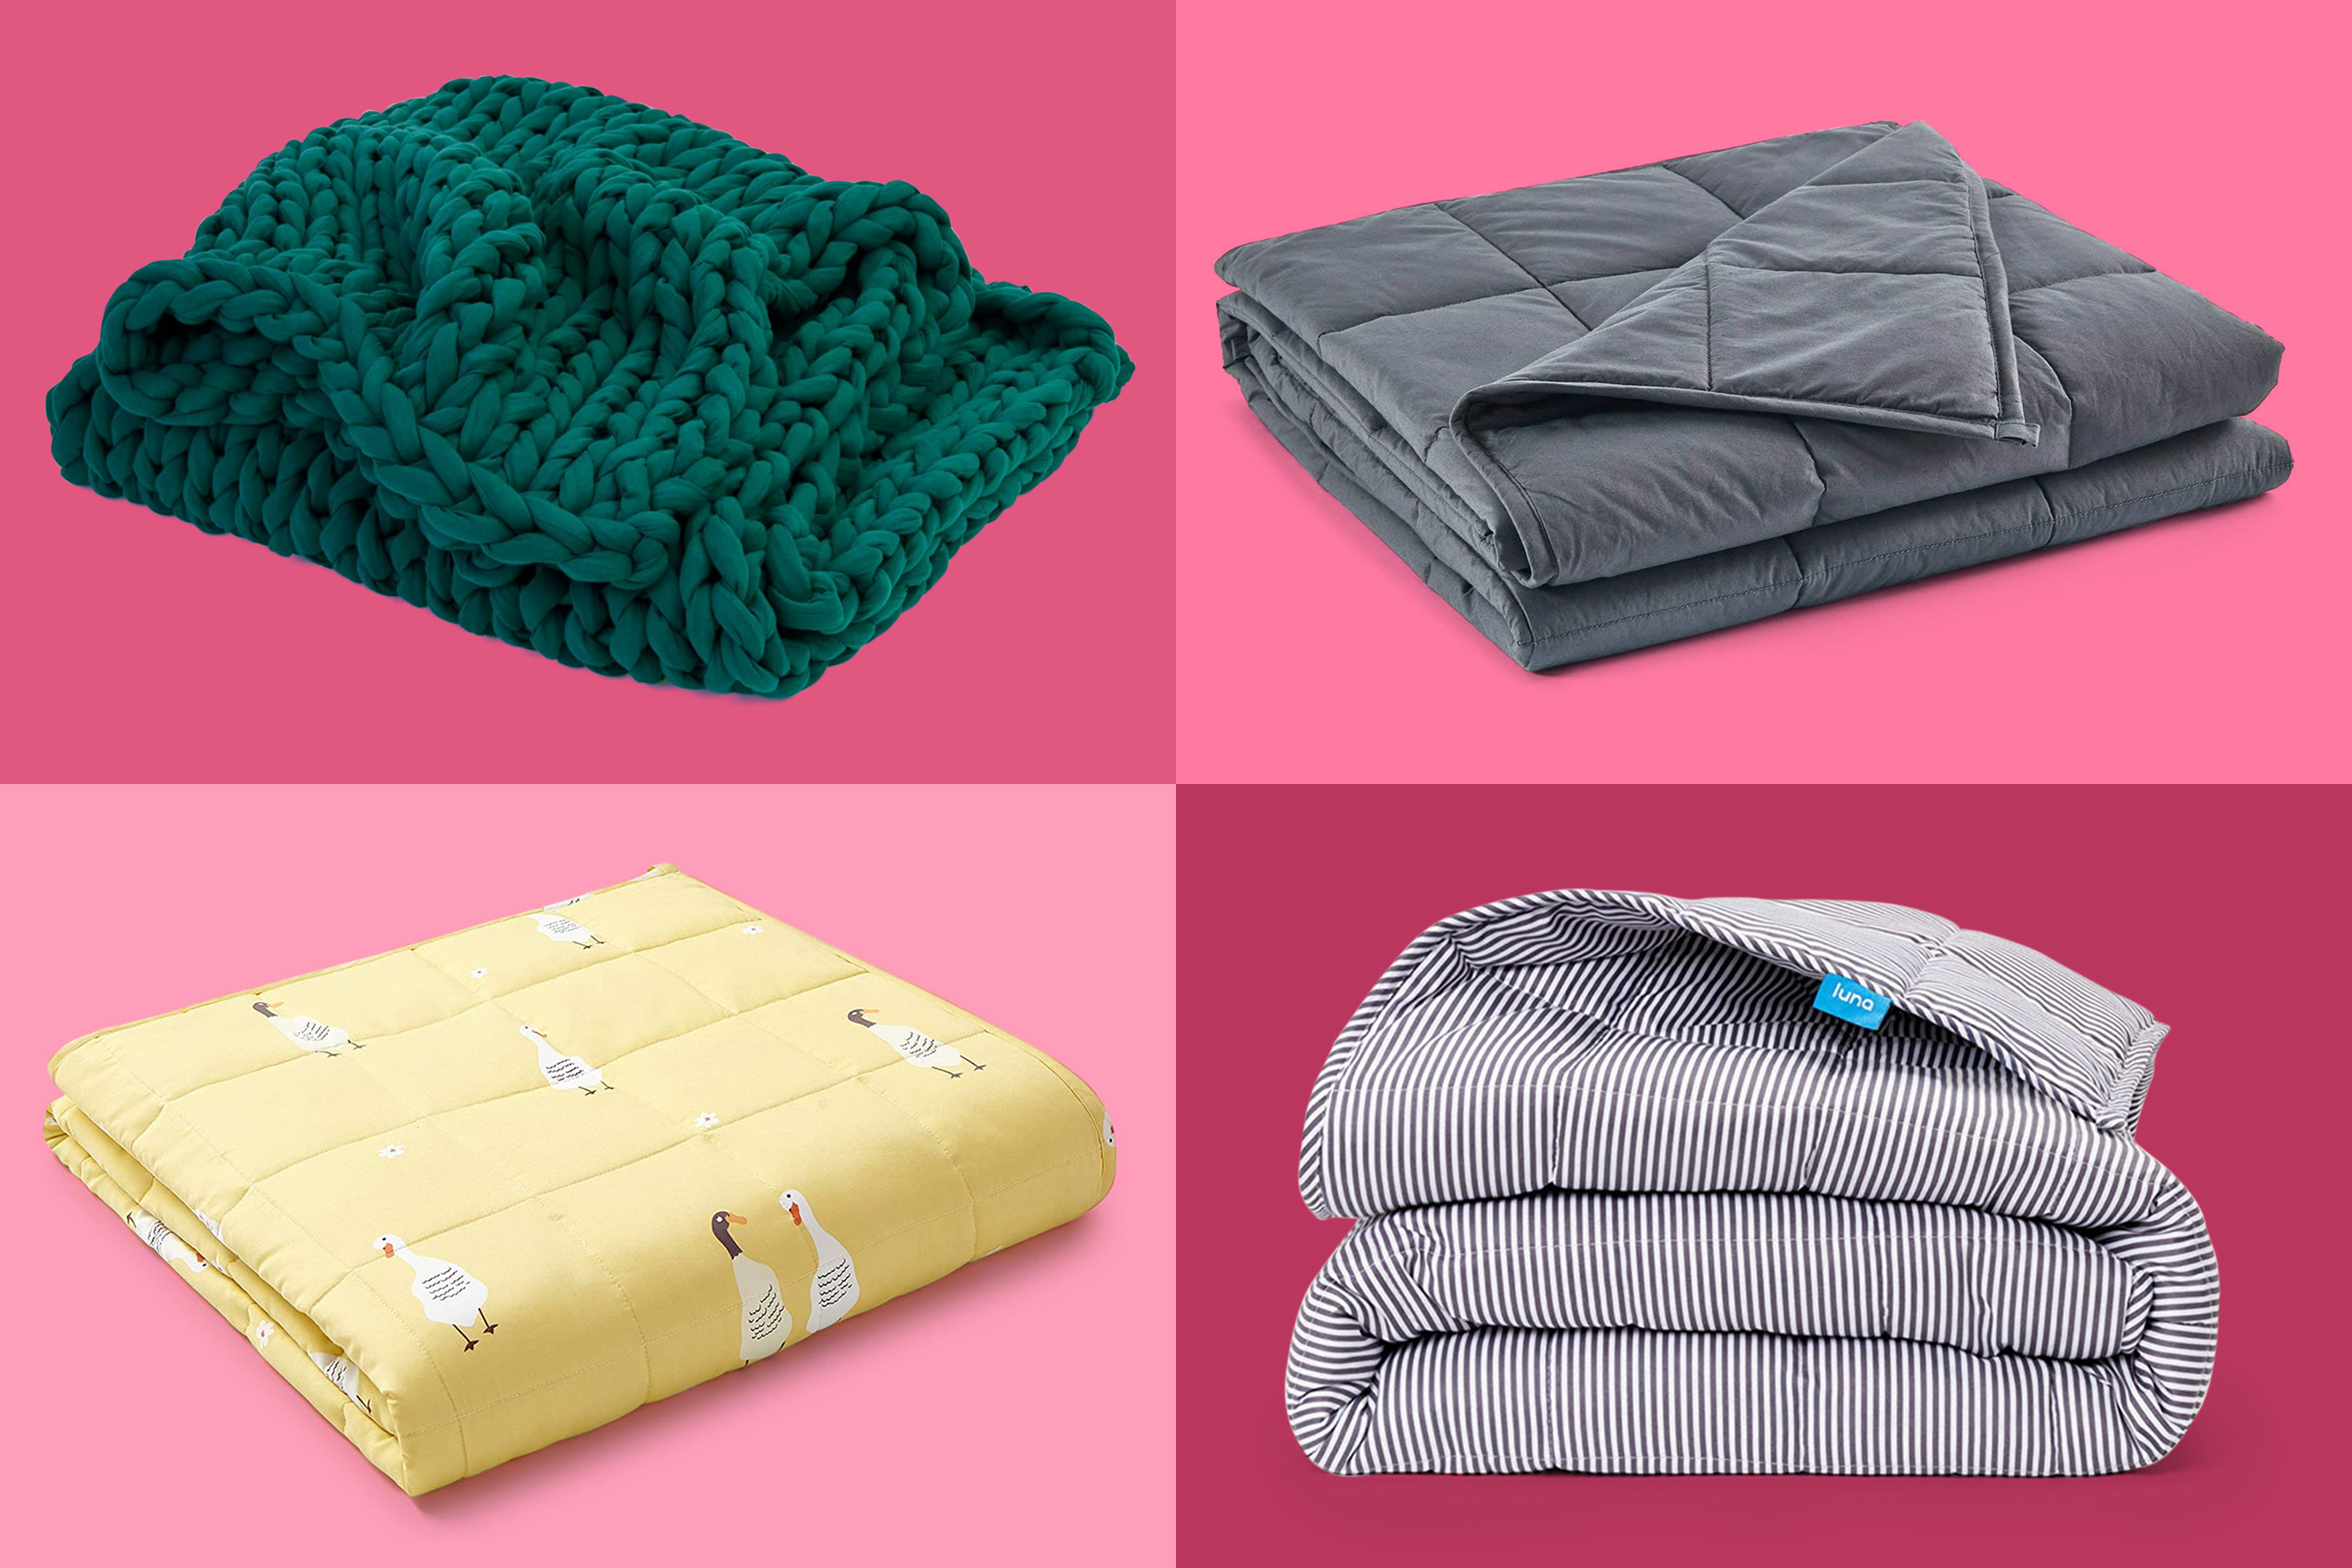 The Best Weighted Blankets for Your Money, According to Experts